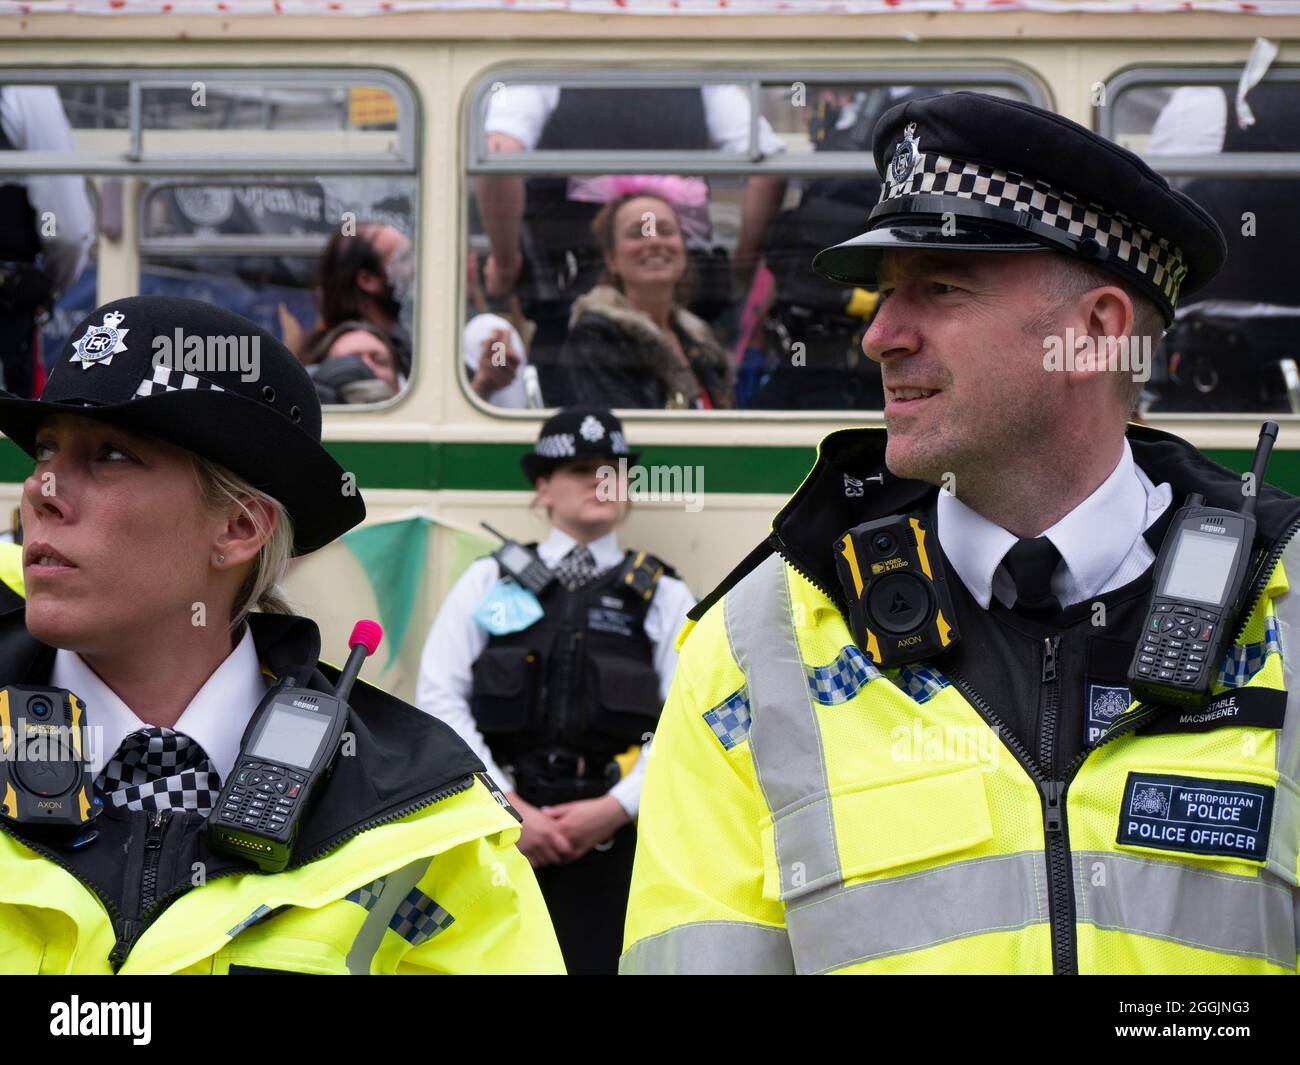 Extinction Rebellion activists London 31 August 2021. Protesters block London Bridge with a bus as part of ongoing XR, protests in London, while police officers guard bus with demonstrators on board Stock Photo